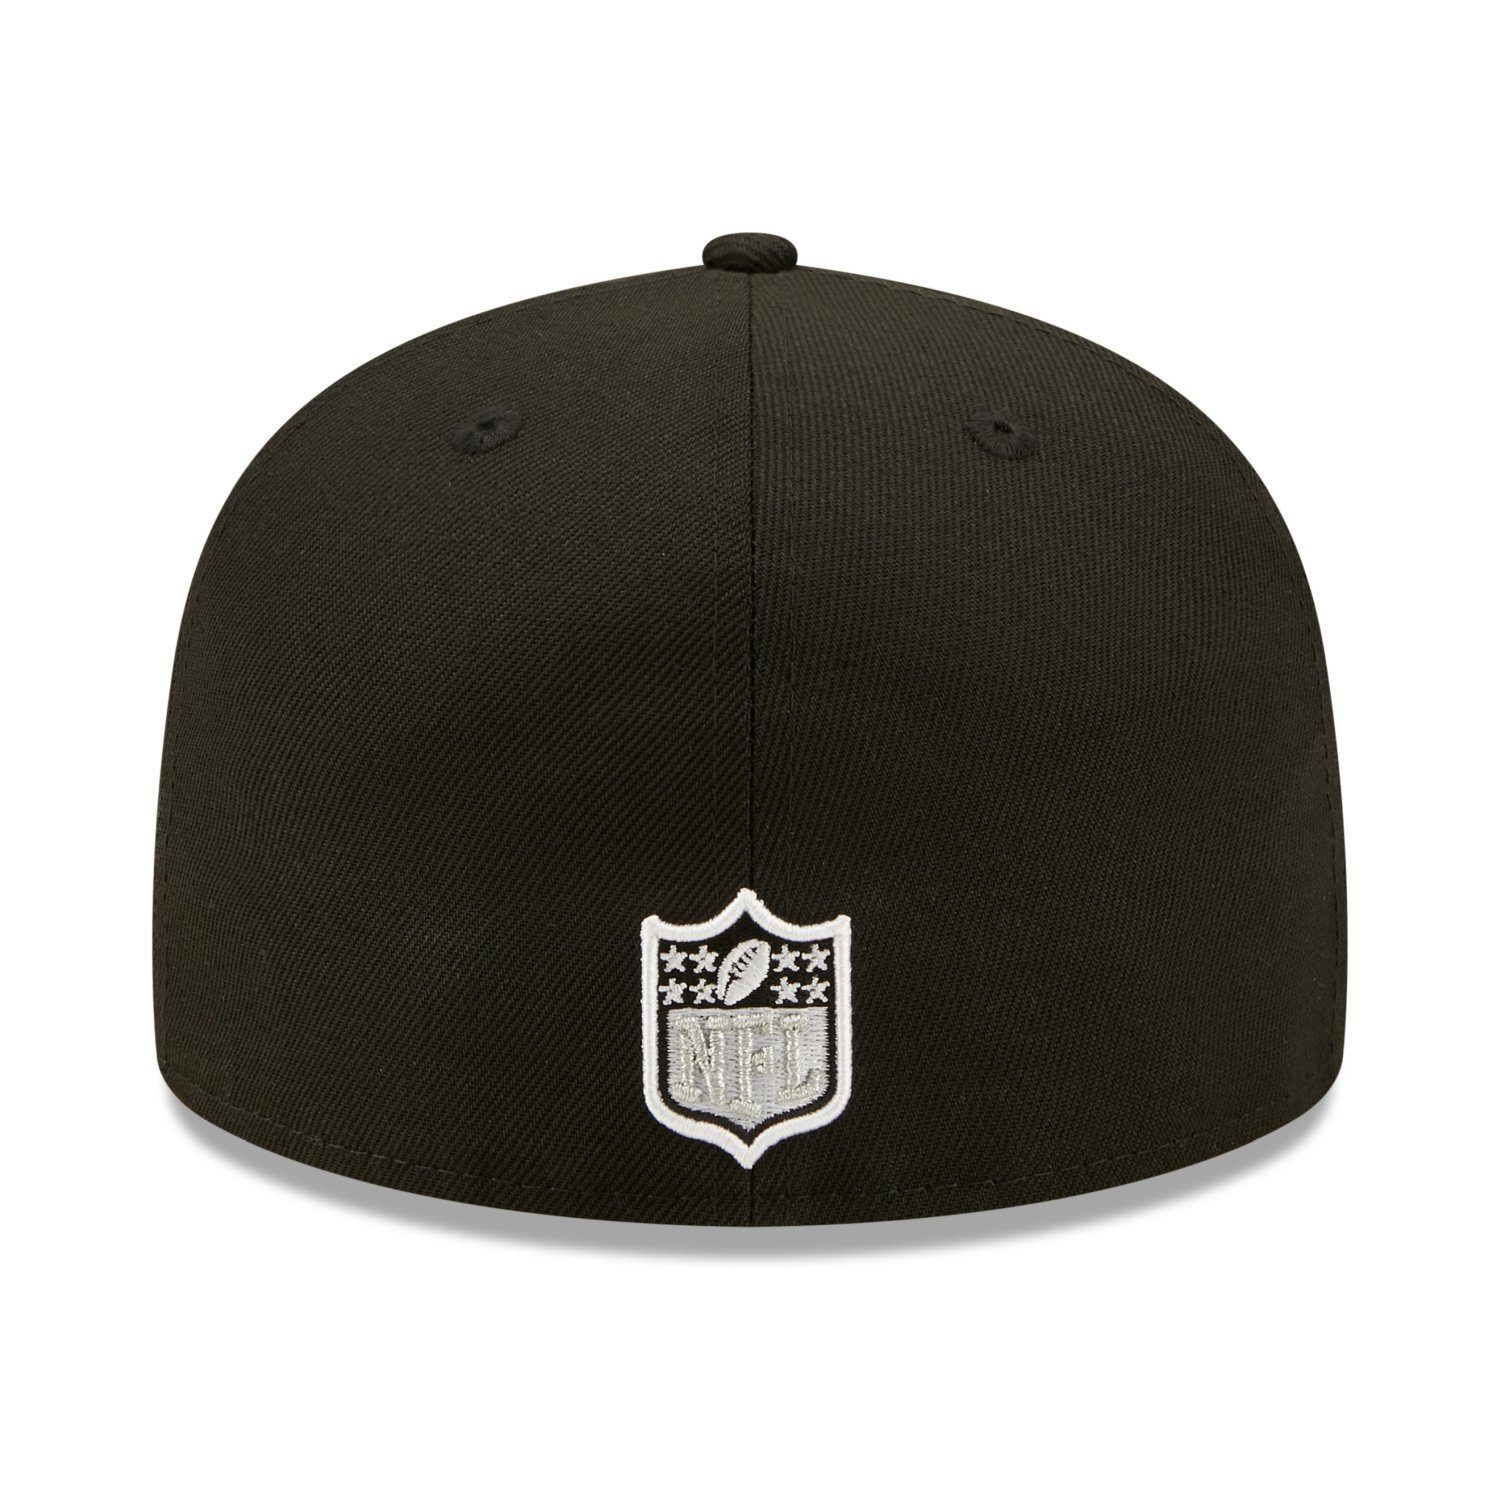 Vegas Raiders New 59Fifty Las 50 Era Years Cap Fitted